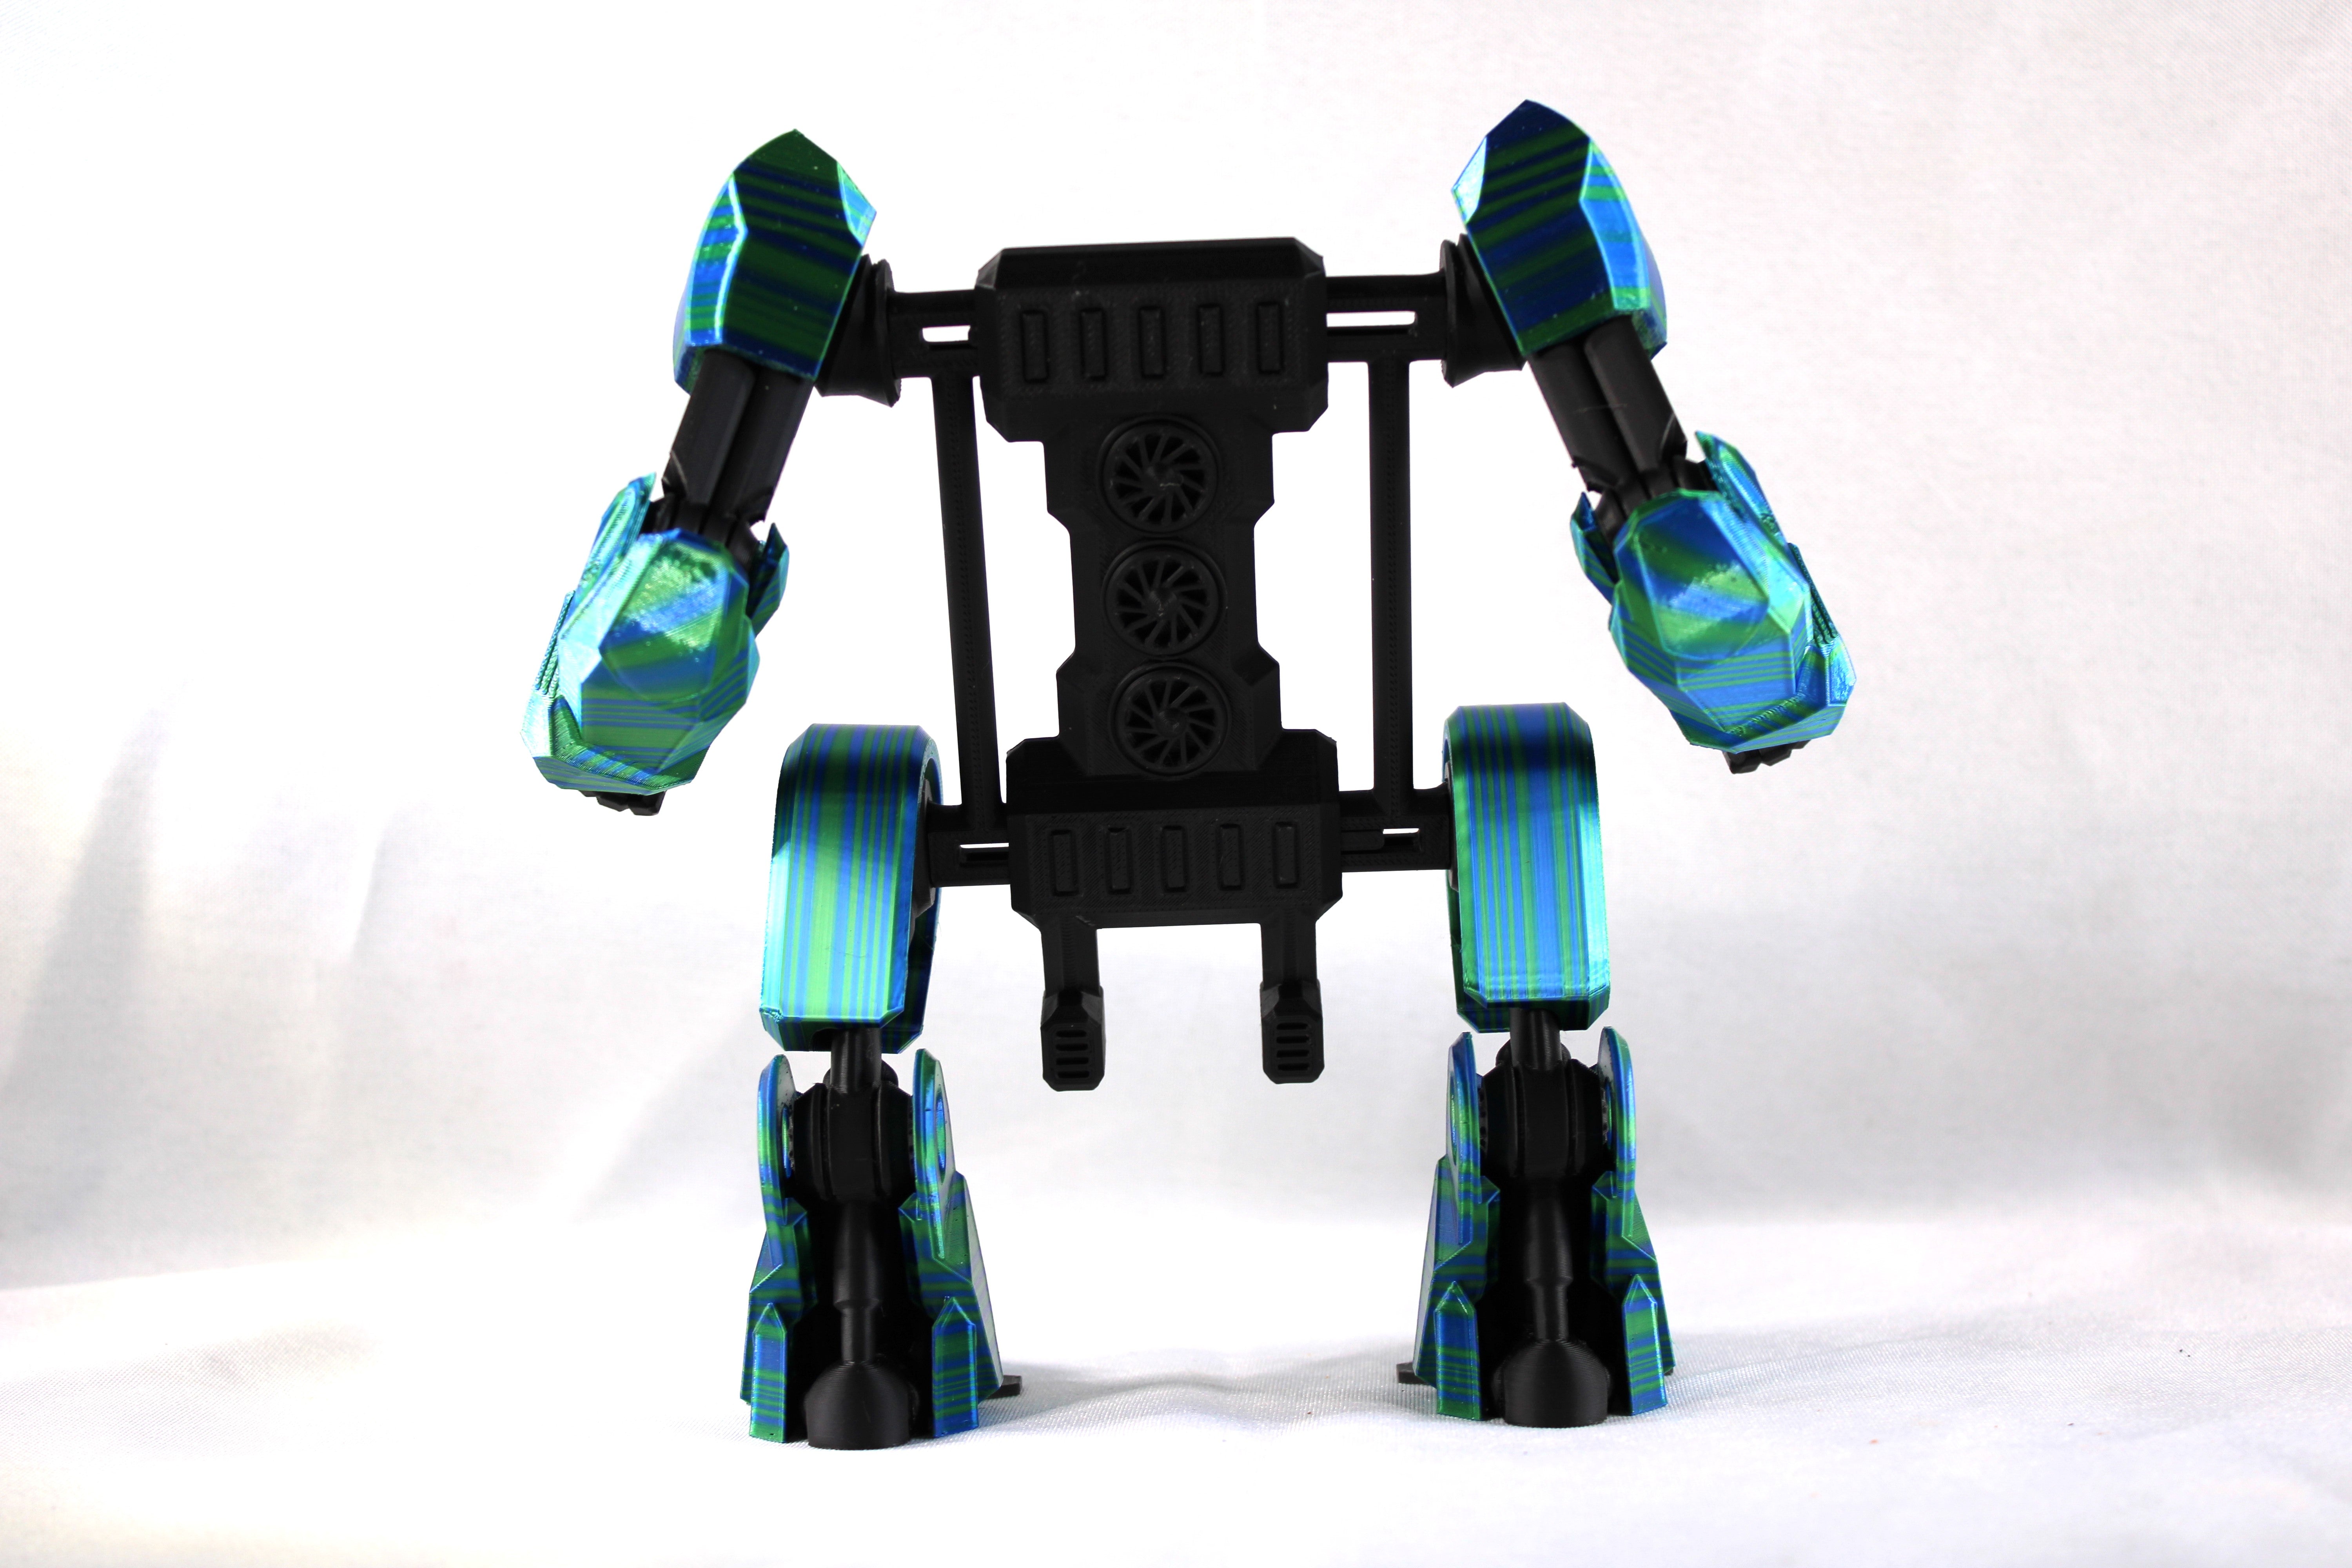 Green, Blue And Black Exo Suit Phone Holder